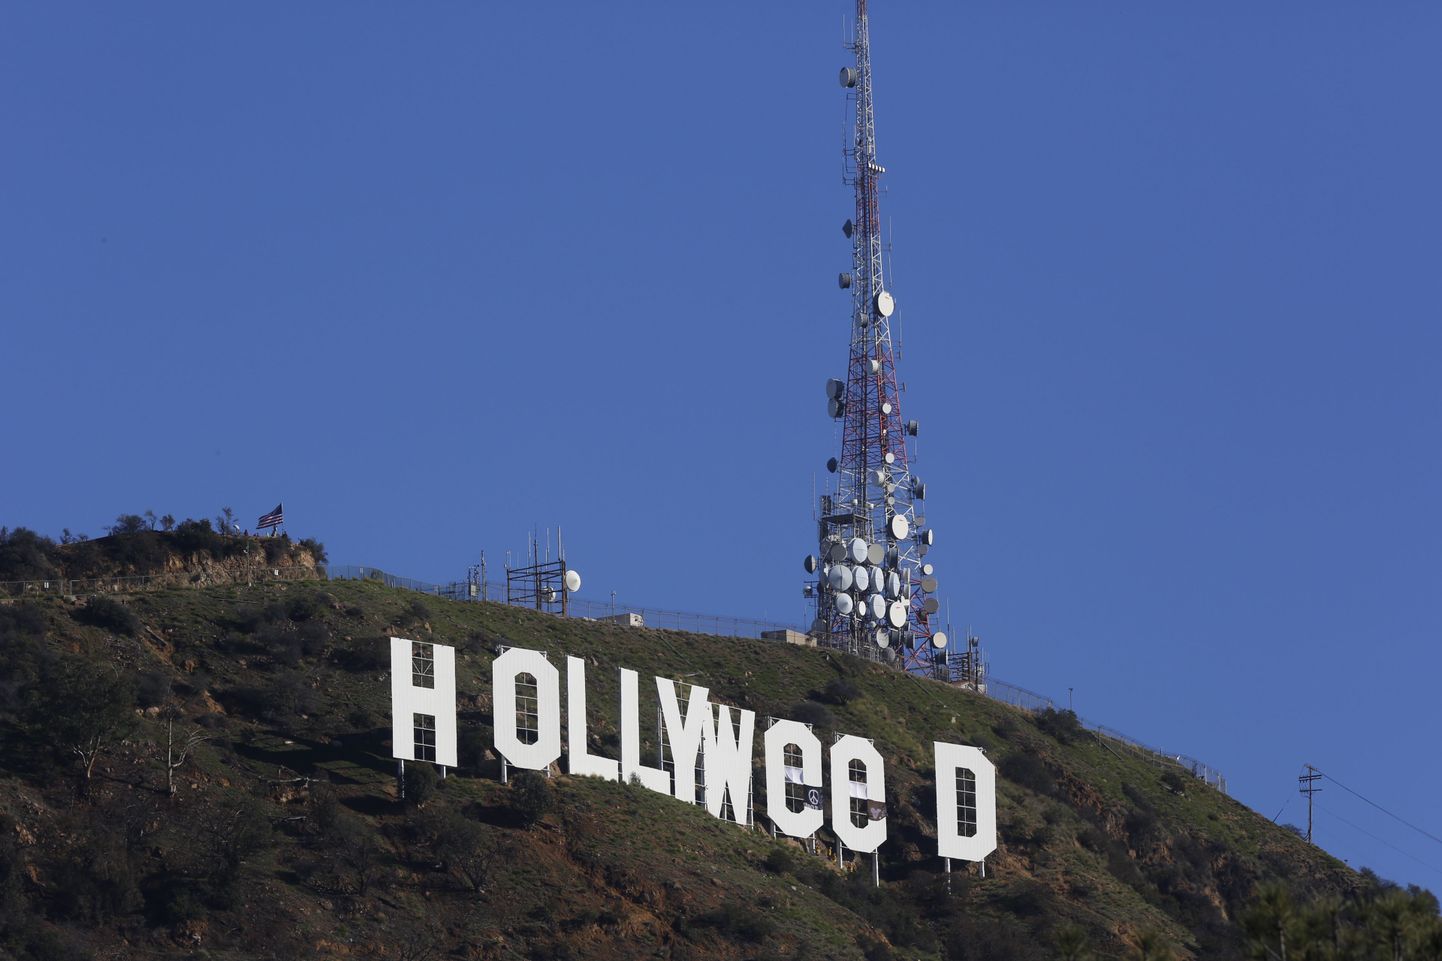 The Hollywood sign is seen vandalized Sunday, Jan. 1, 2017. Los Angeles residents awoke New Year's Day to find a prankster had altered the famed Hollywood sign to read "HOLLYWeeD."